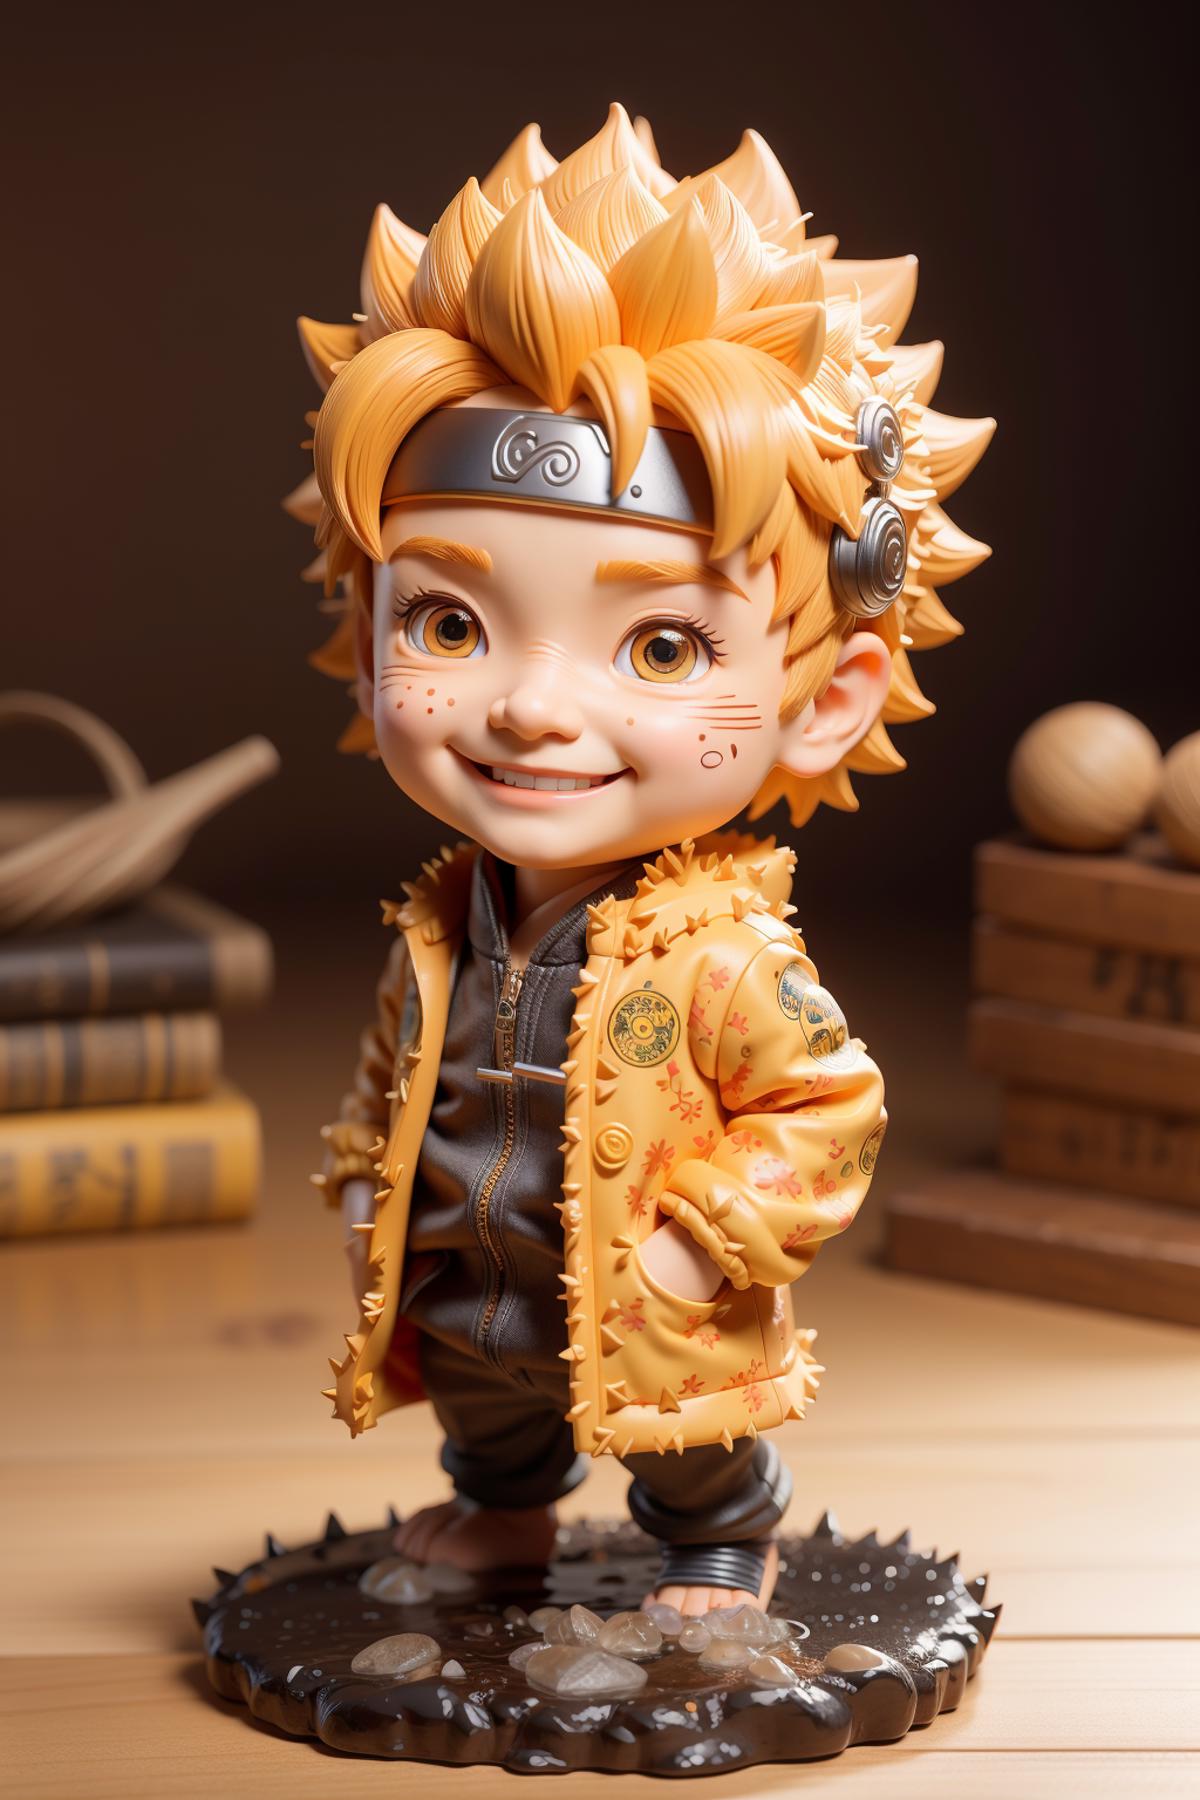 toy figurine||Concept image by Trisan